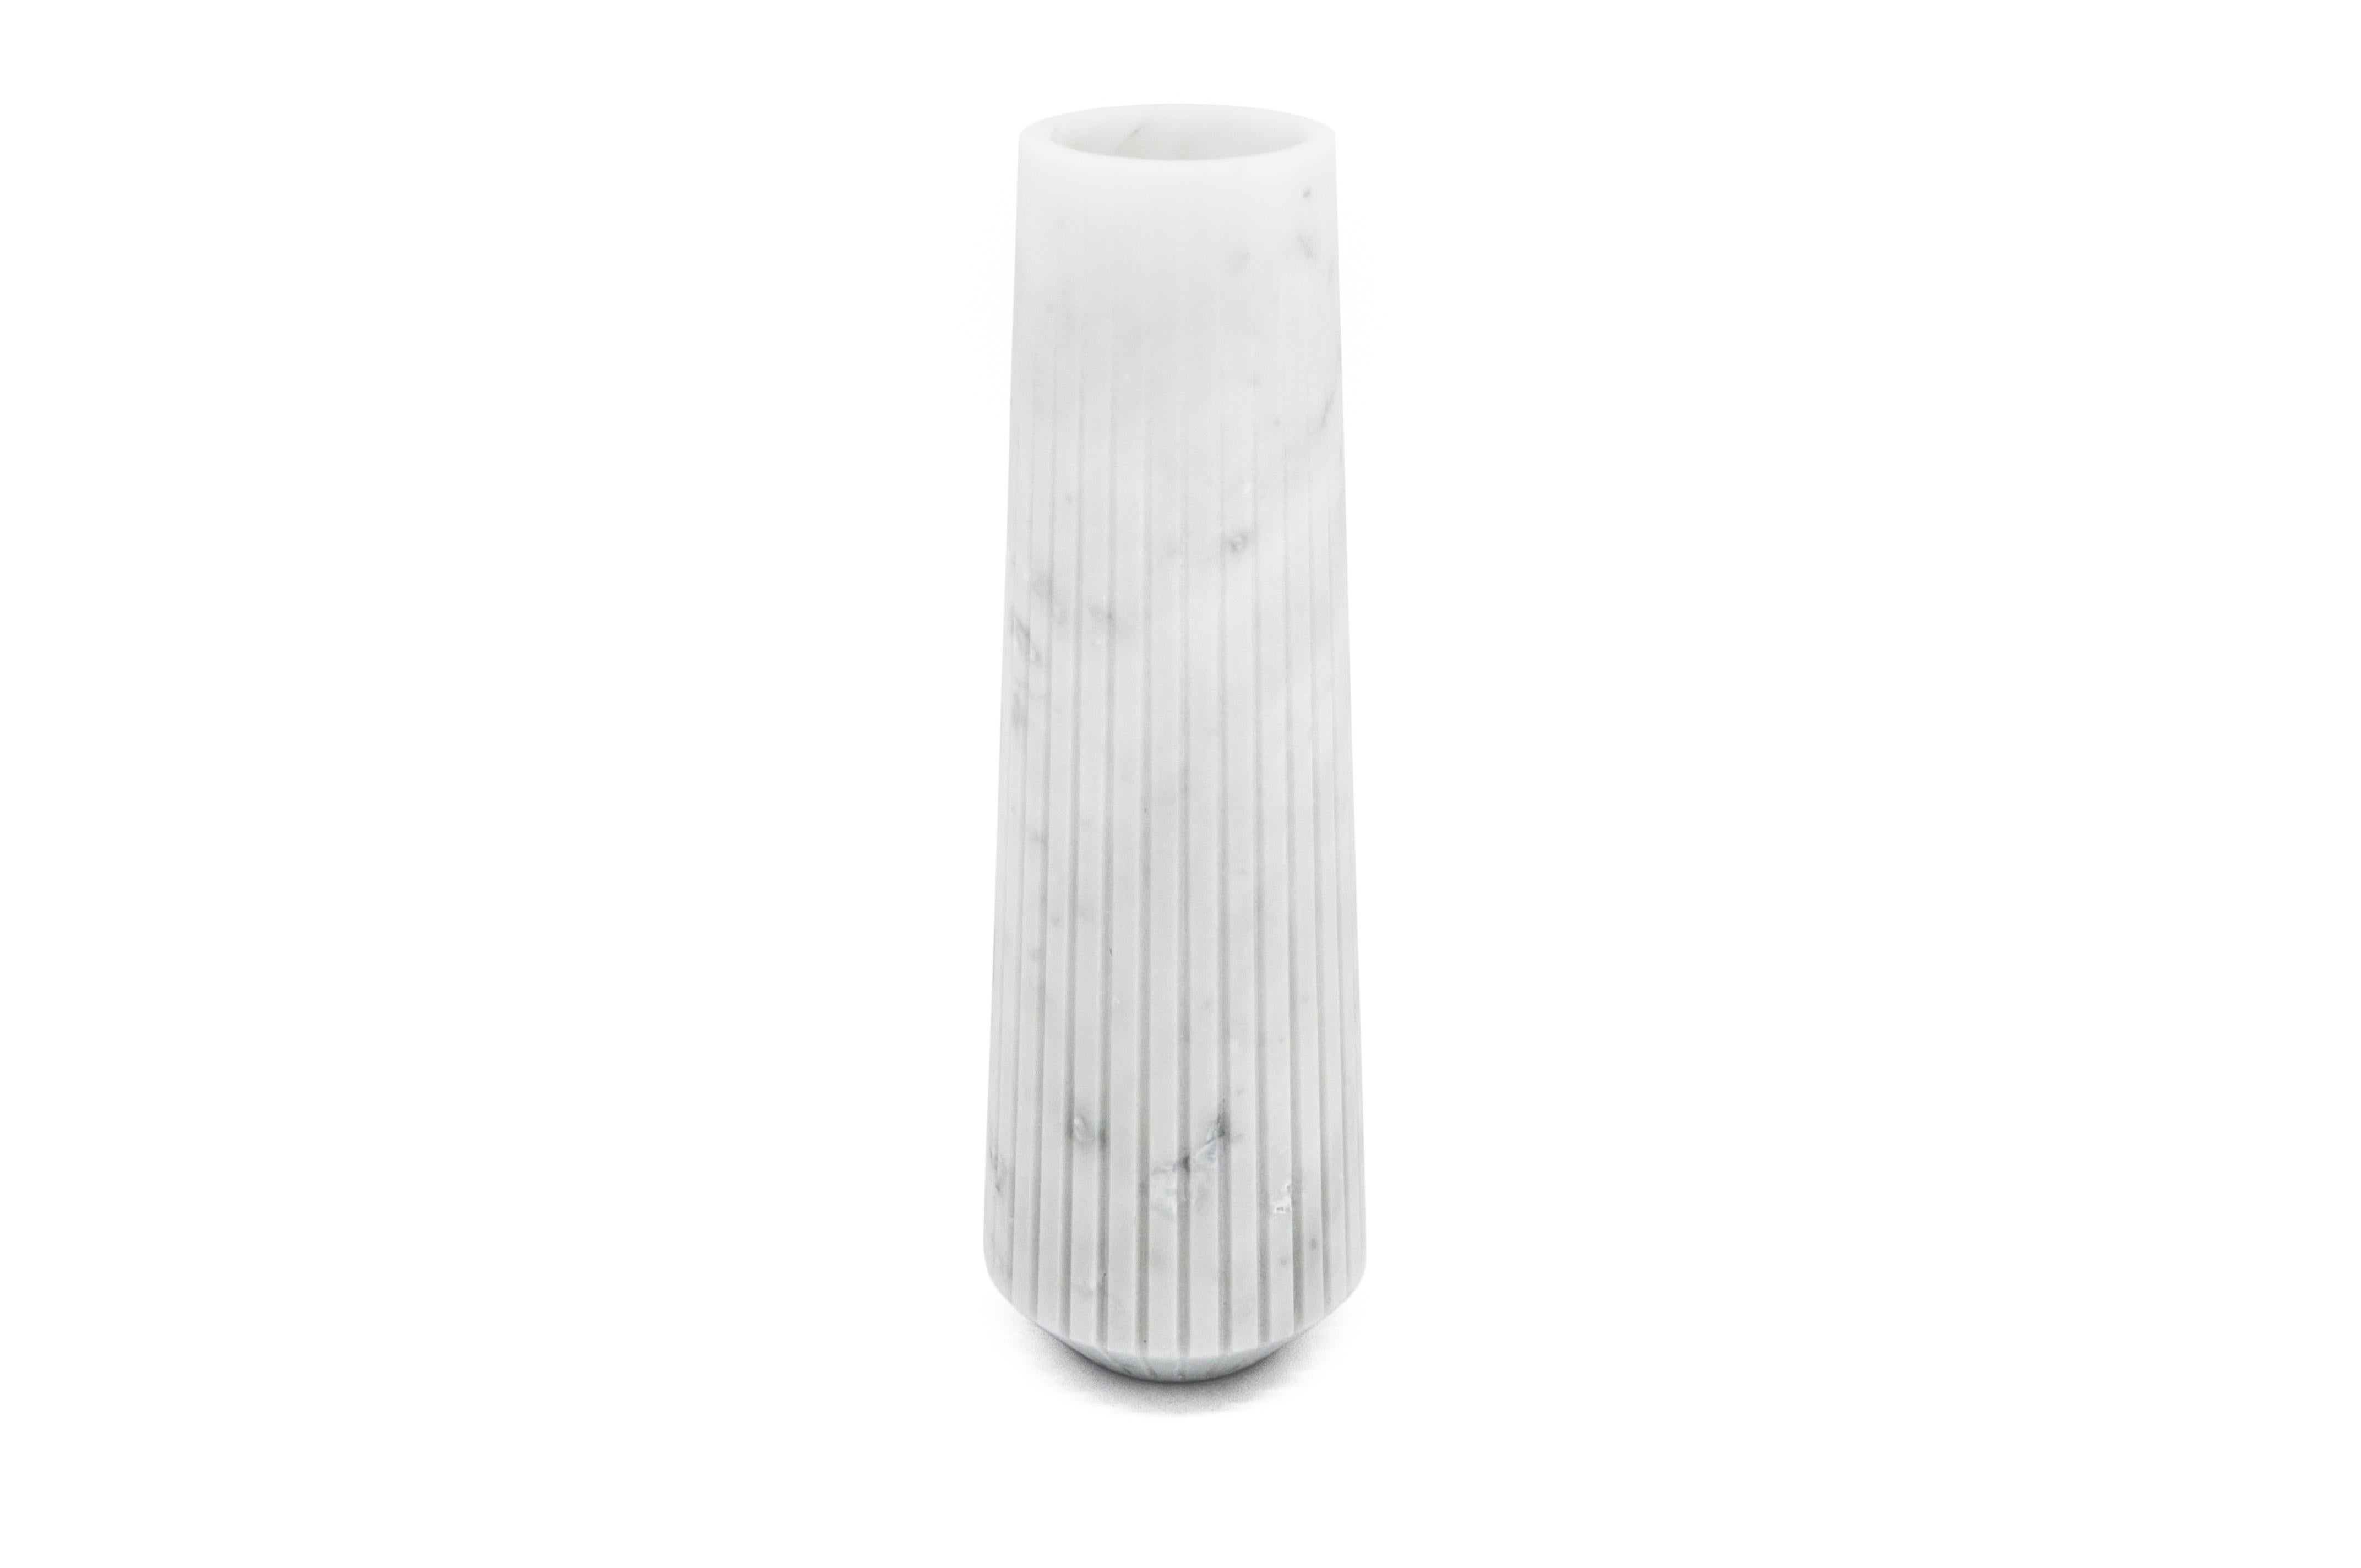 High striped vase in white Carrara marble.
-Jacopo Simonetti design for FiammettaV-
Each piece is in a way unique (every marble block is different in veins and shades) and handmade by Italian artisans specialized over generations in processing